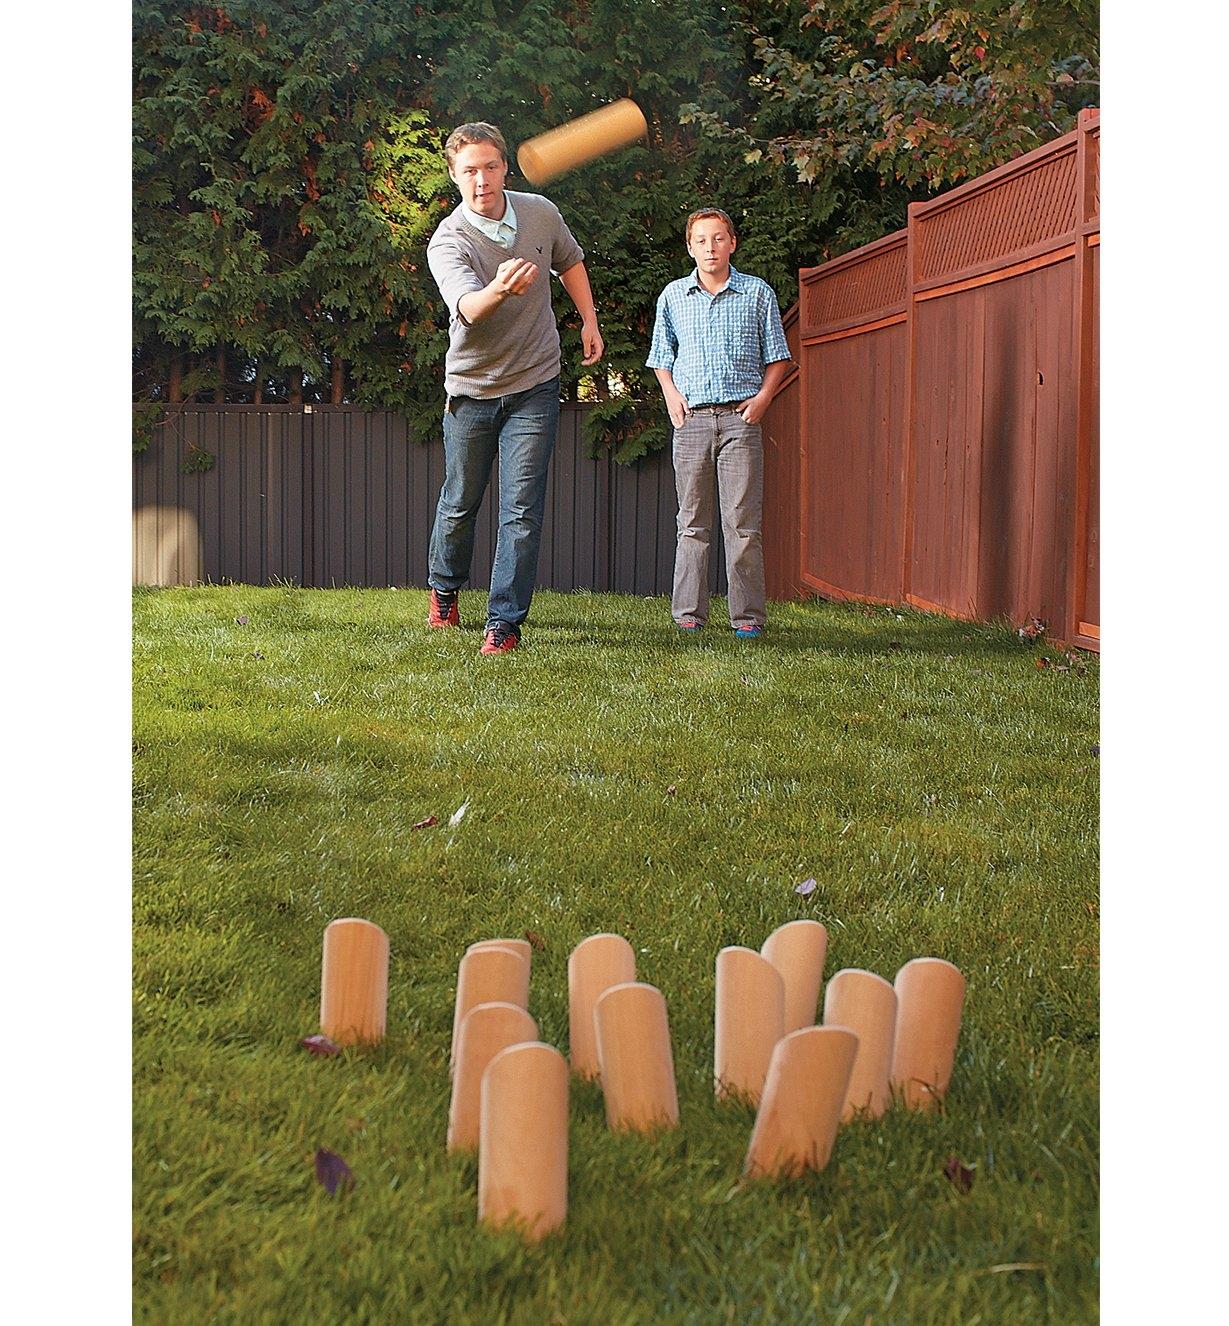 A man throws the mölkky toward the skittles while a boy watches